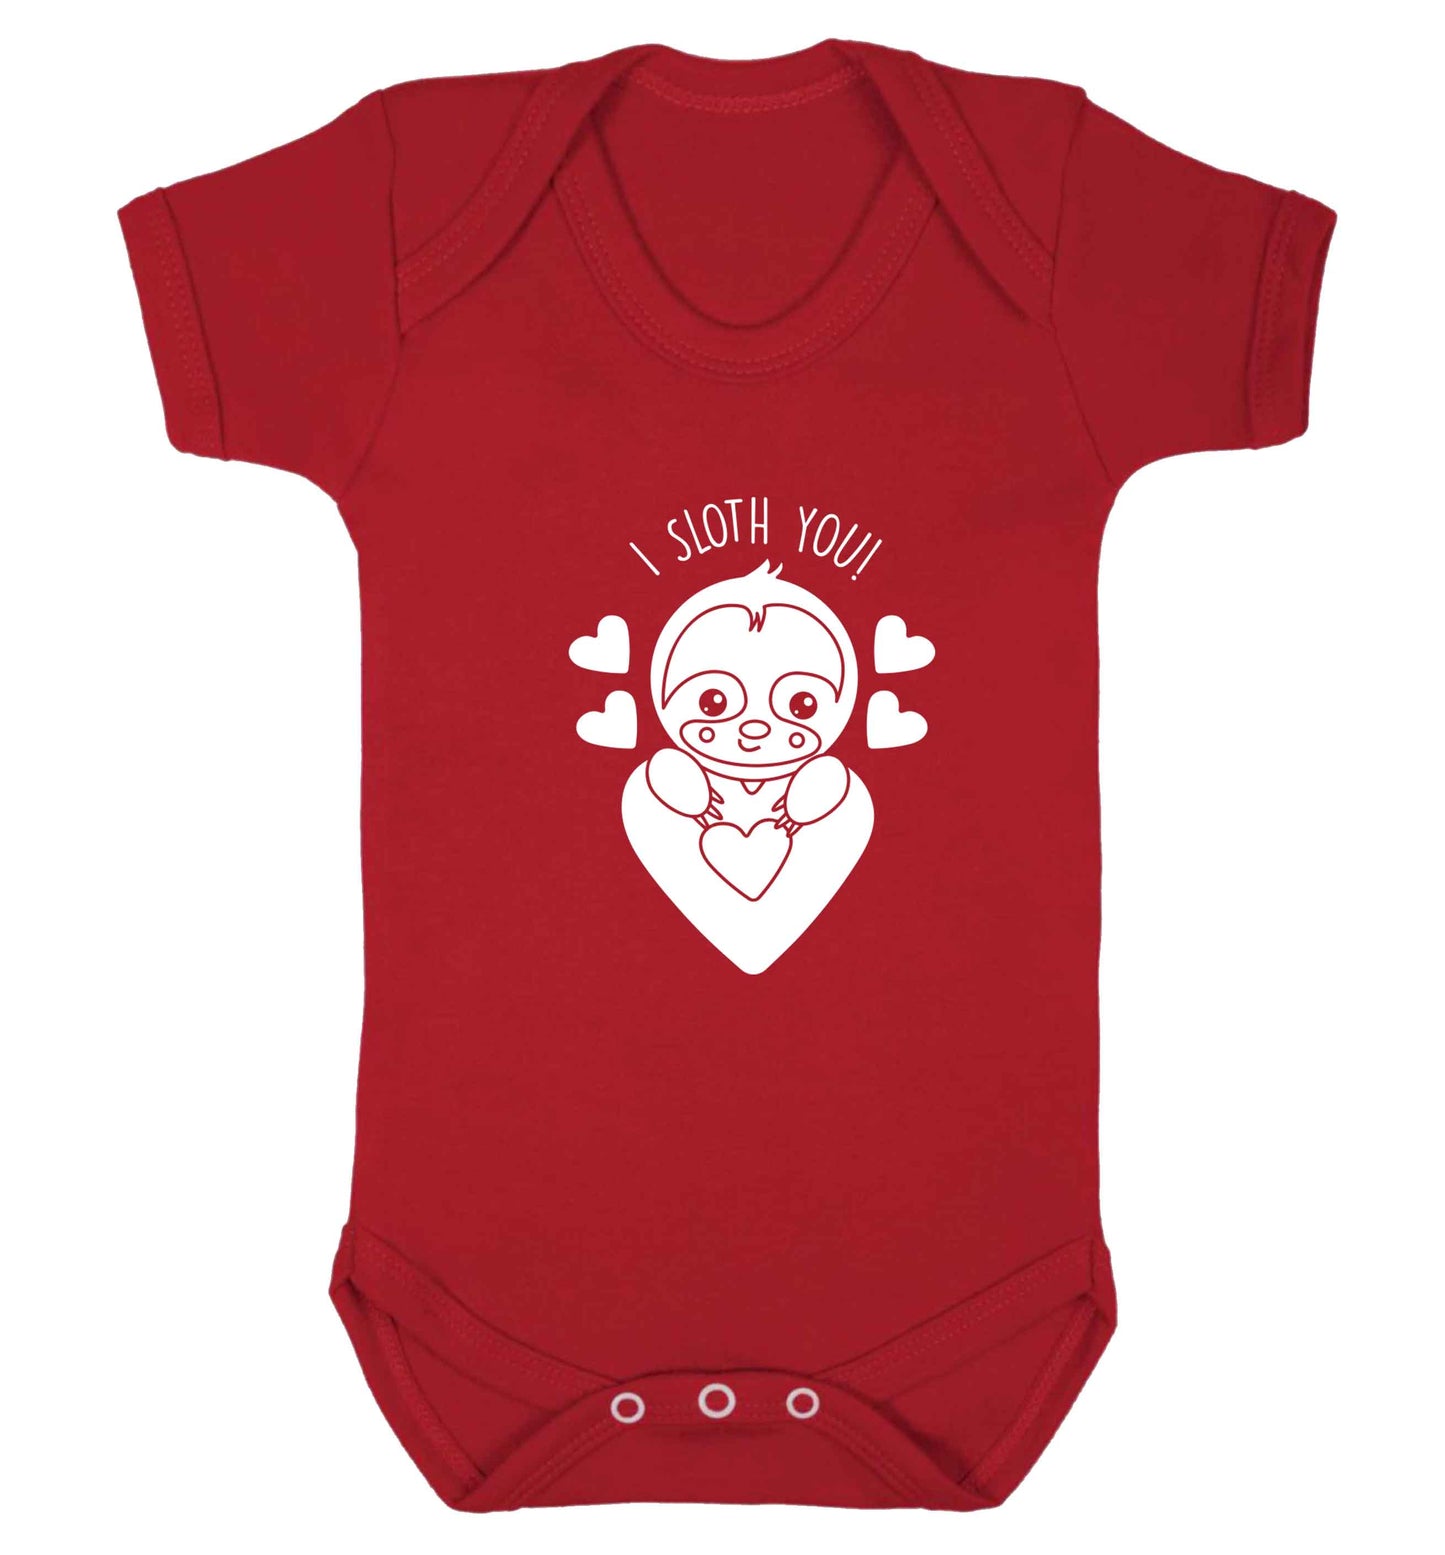 I sloth you baby vest red 18-24 months